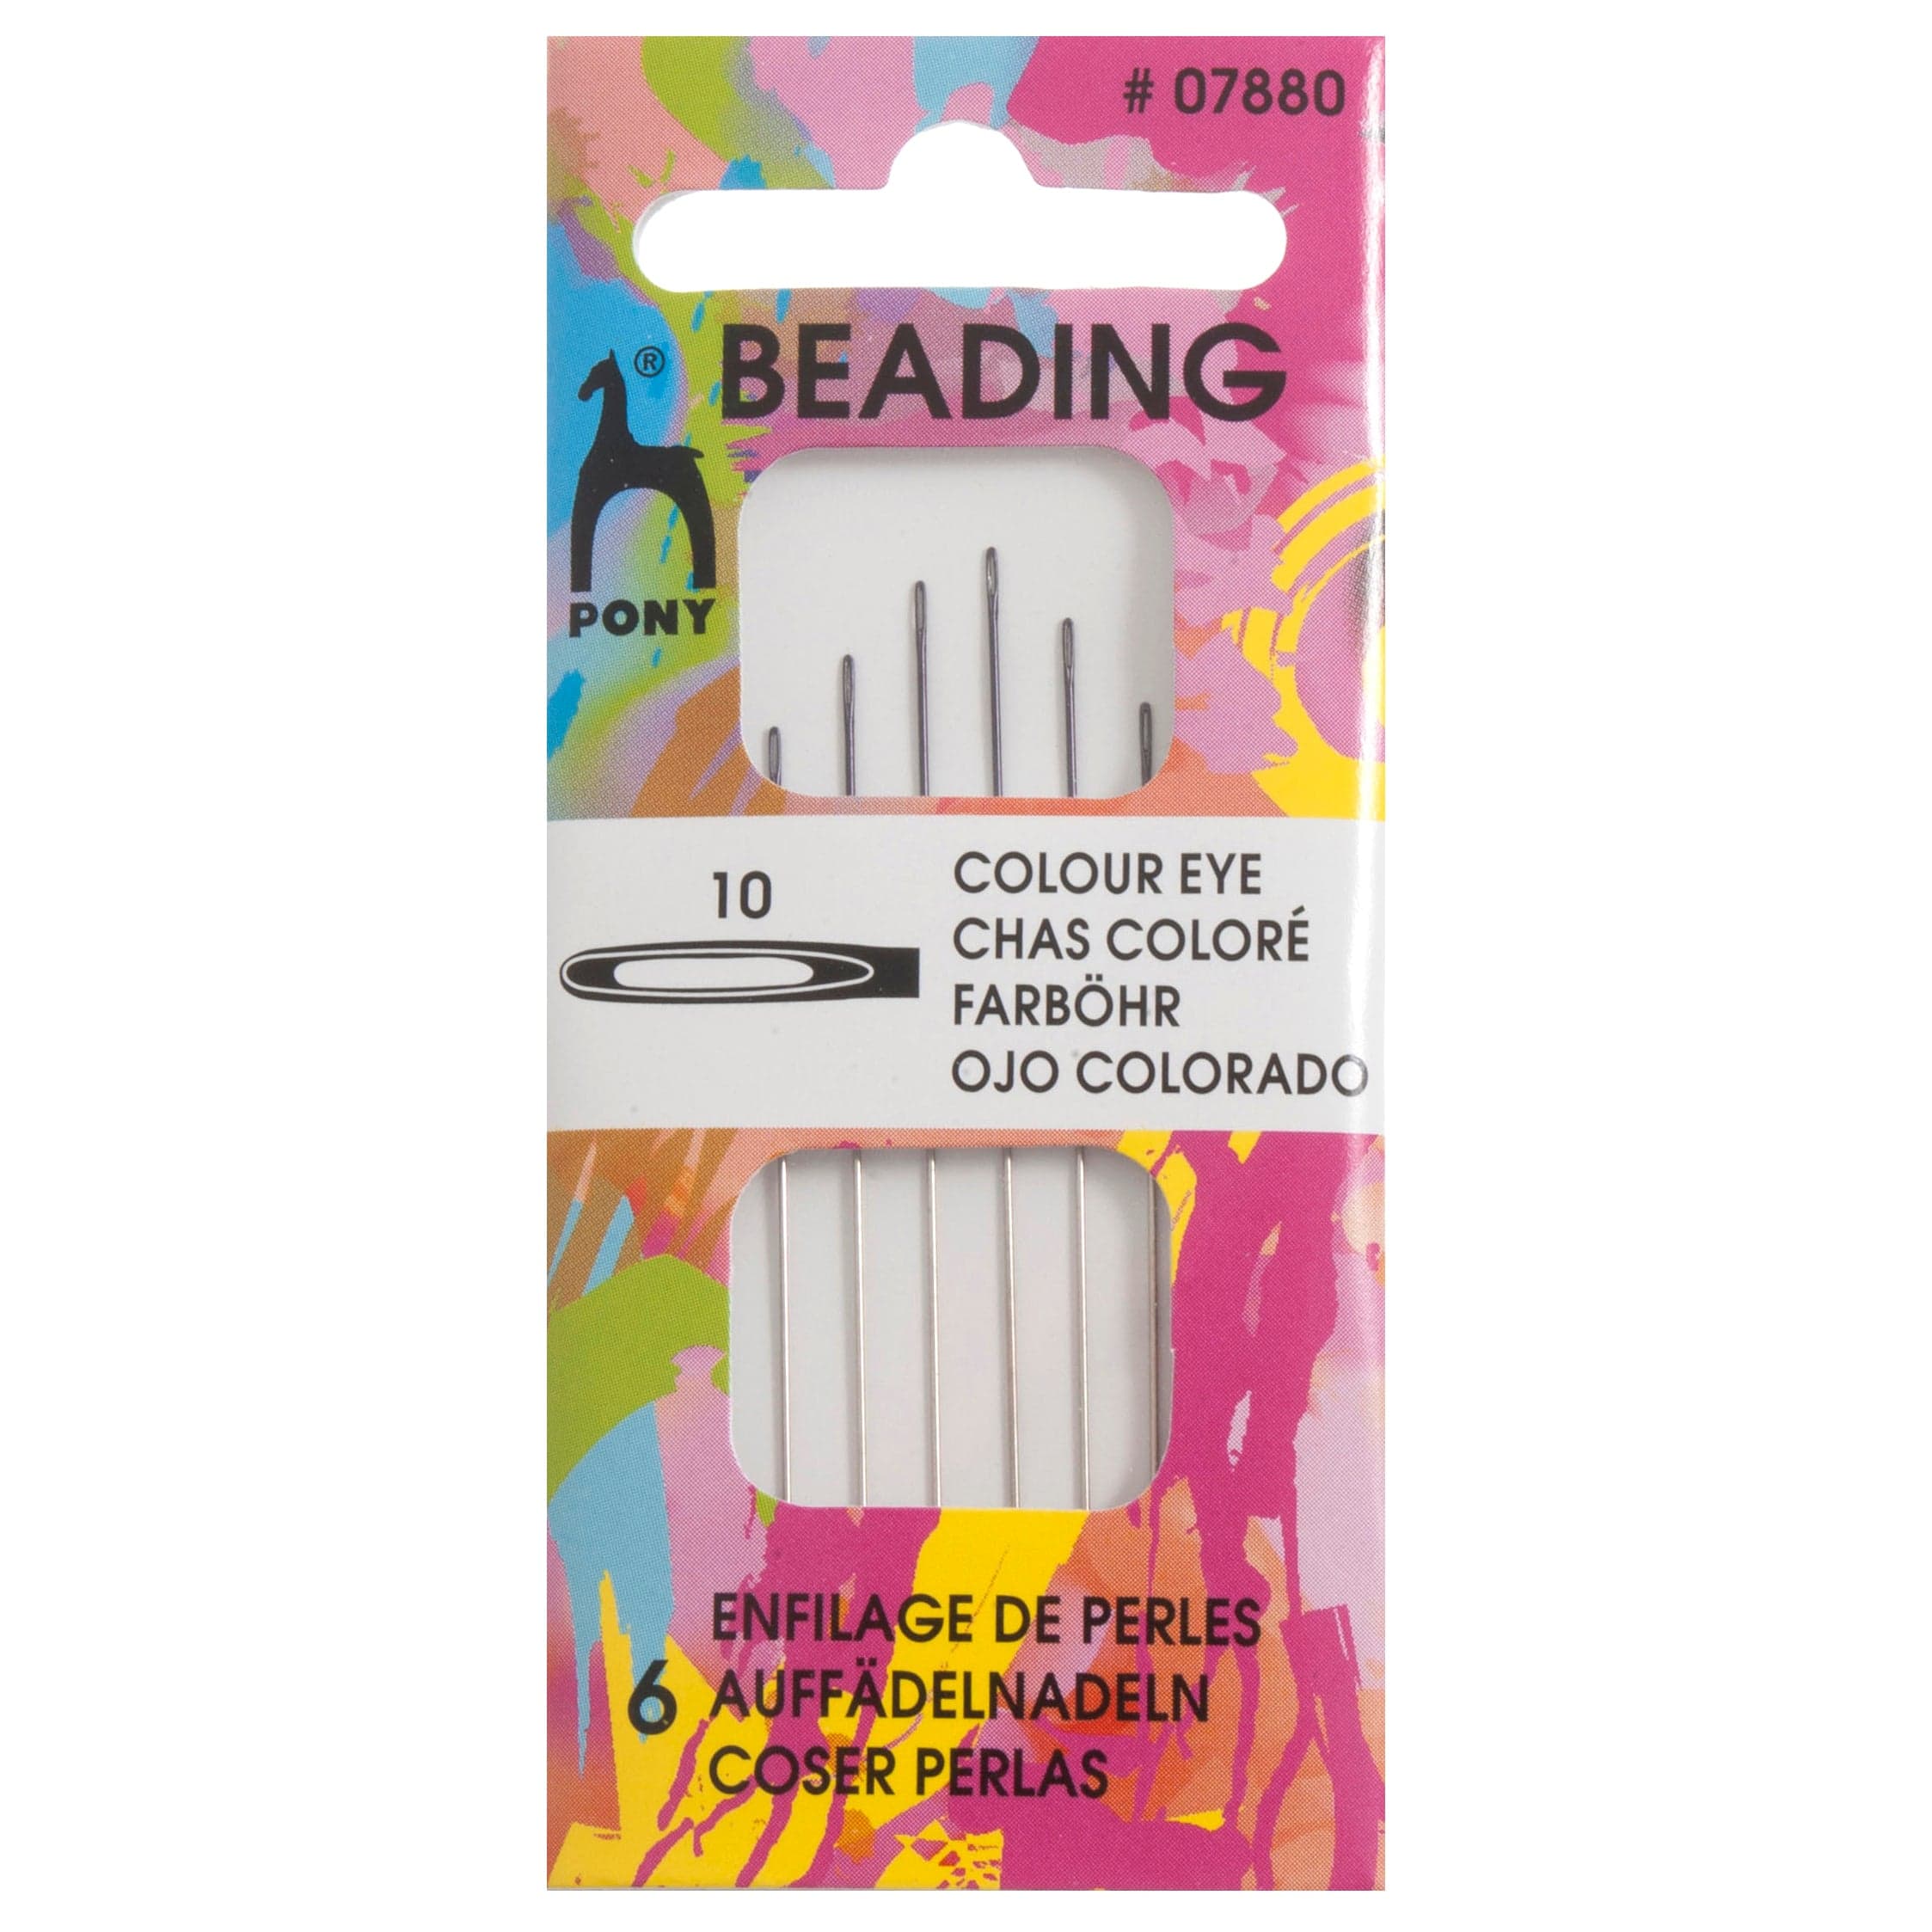 Pony Accessories Pony Pack of 5 Beading Needles with Colour-Coded Eye (Size 10) 8901003078800